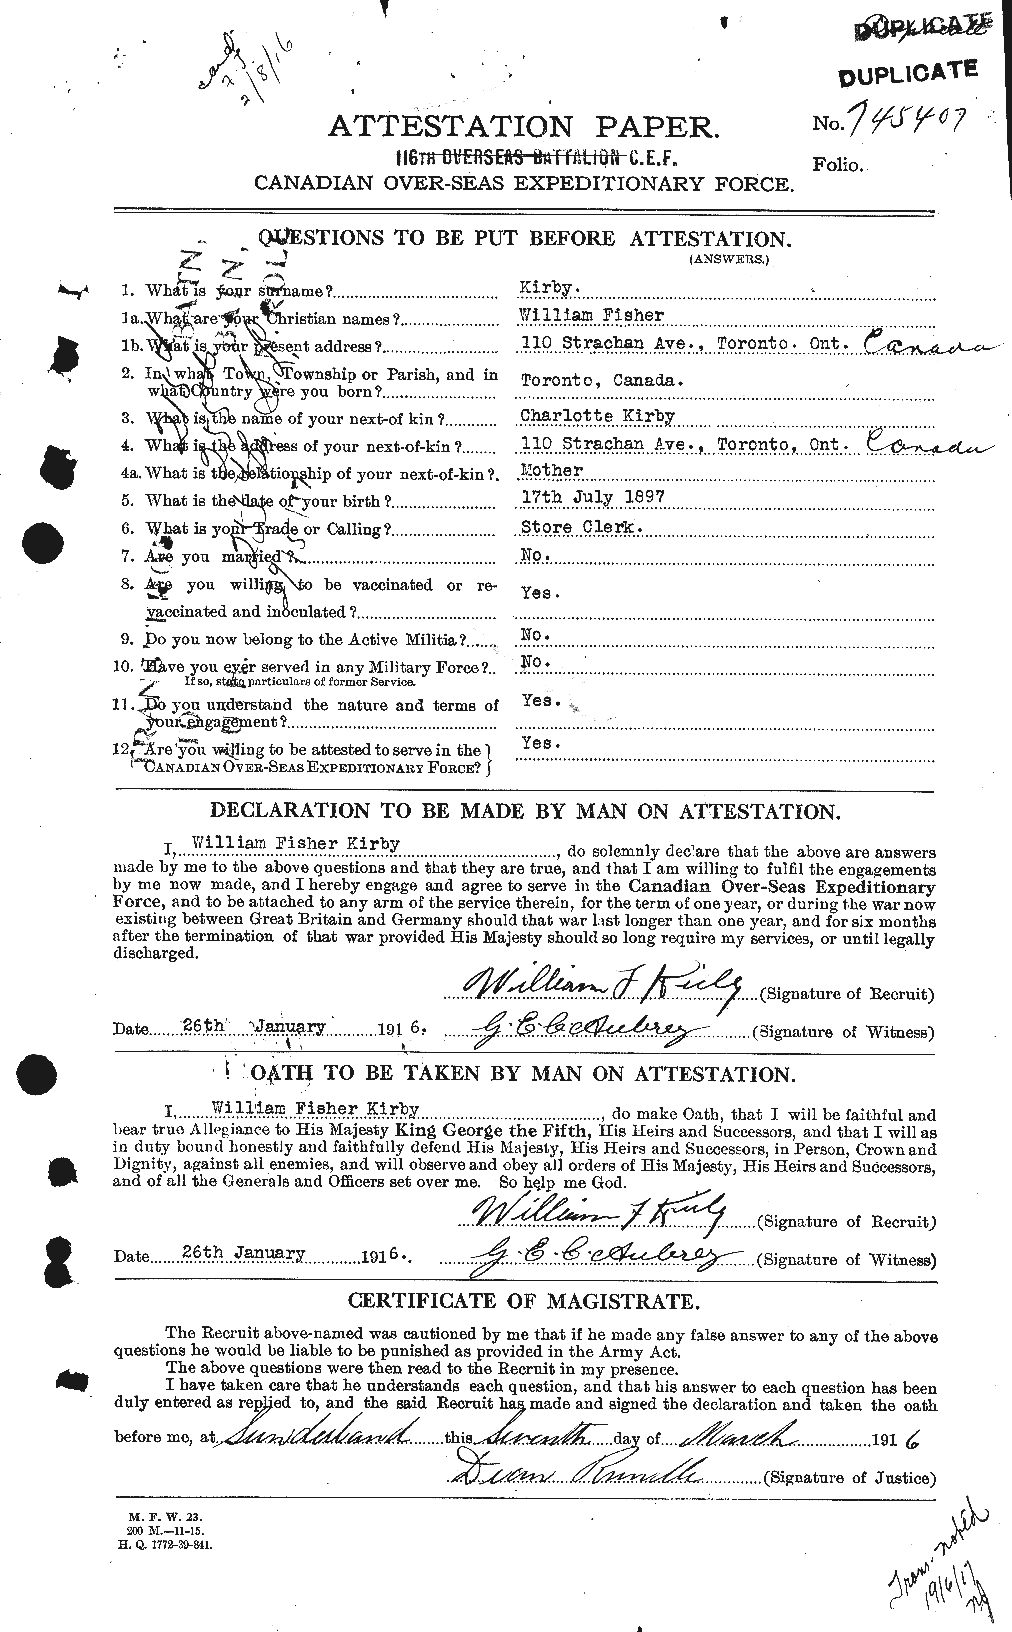 Personnel Records of the First World War - CEF 437295a